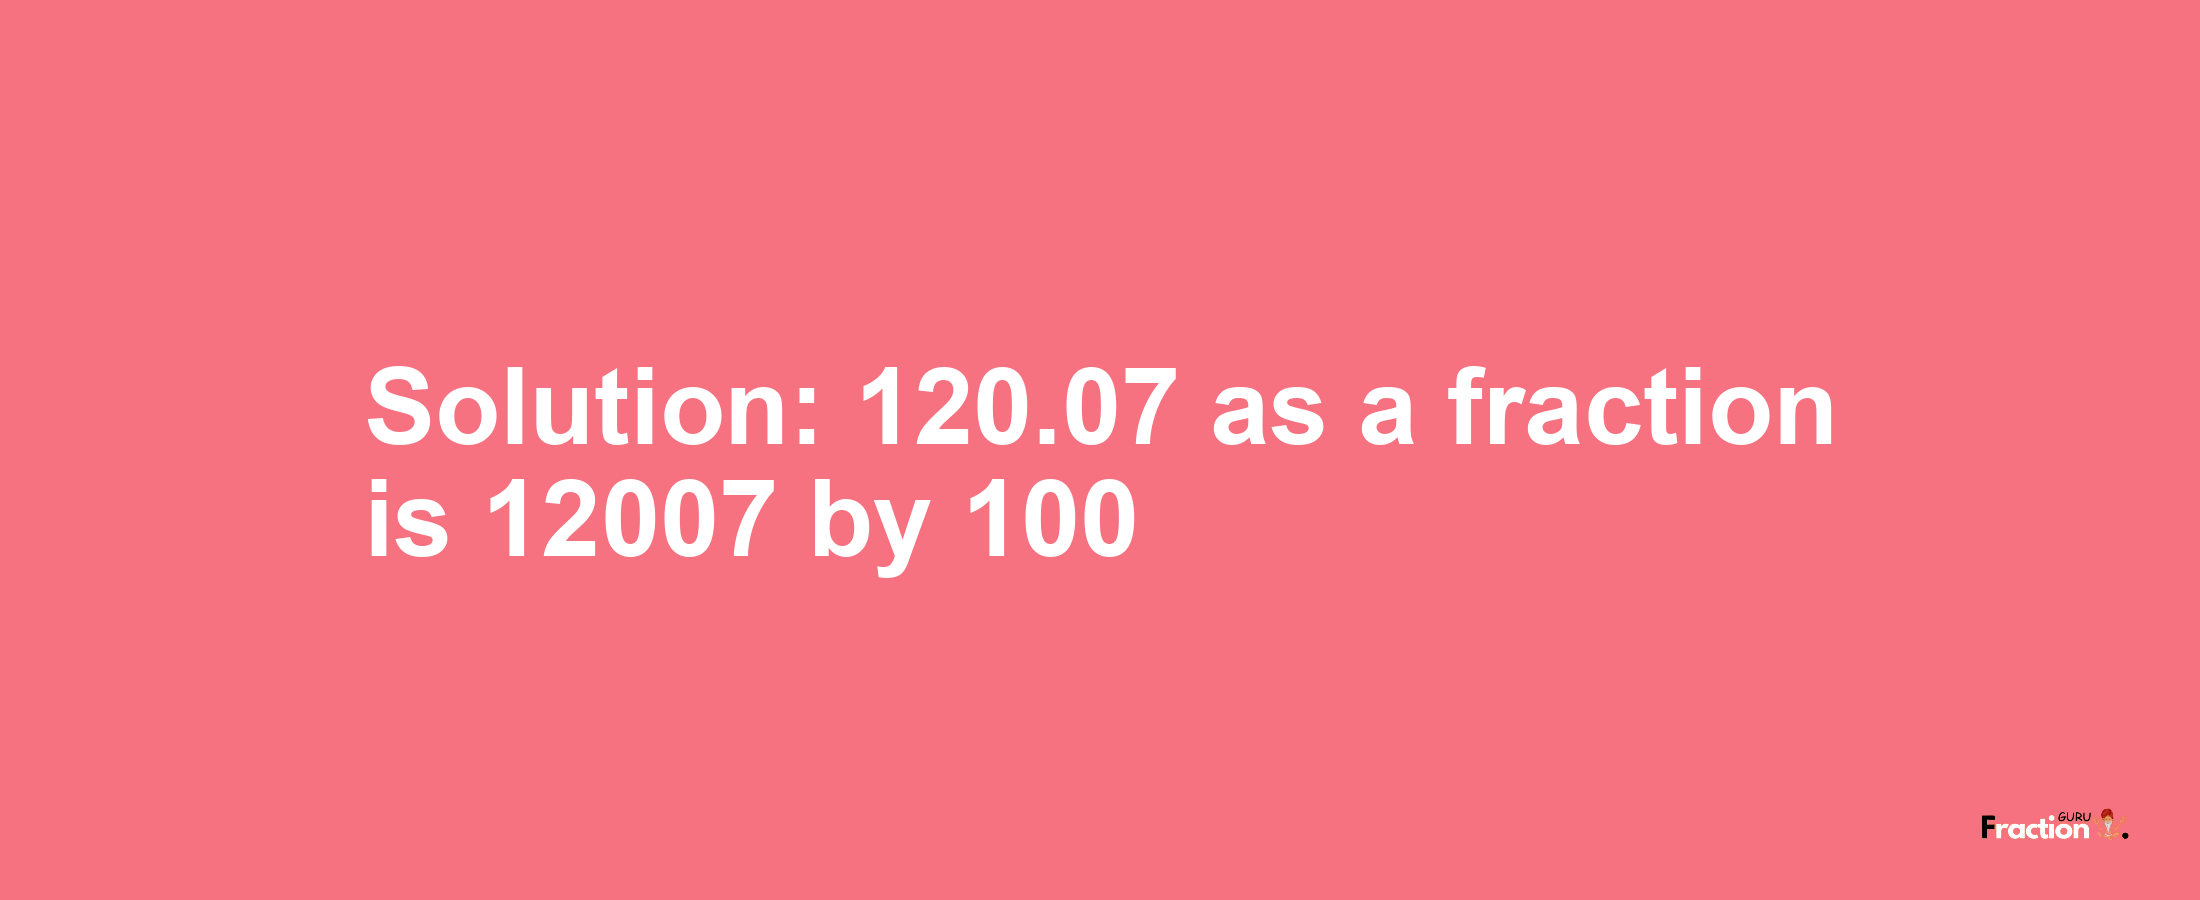 Solution:120.07 as a fraction is 12007/100